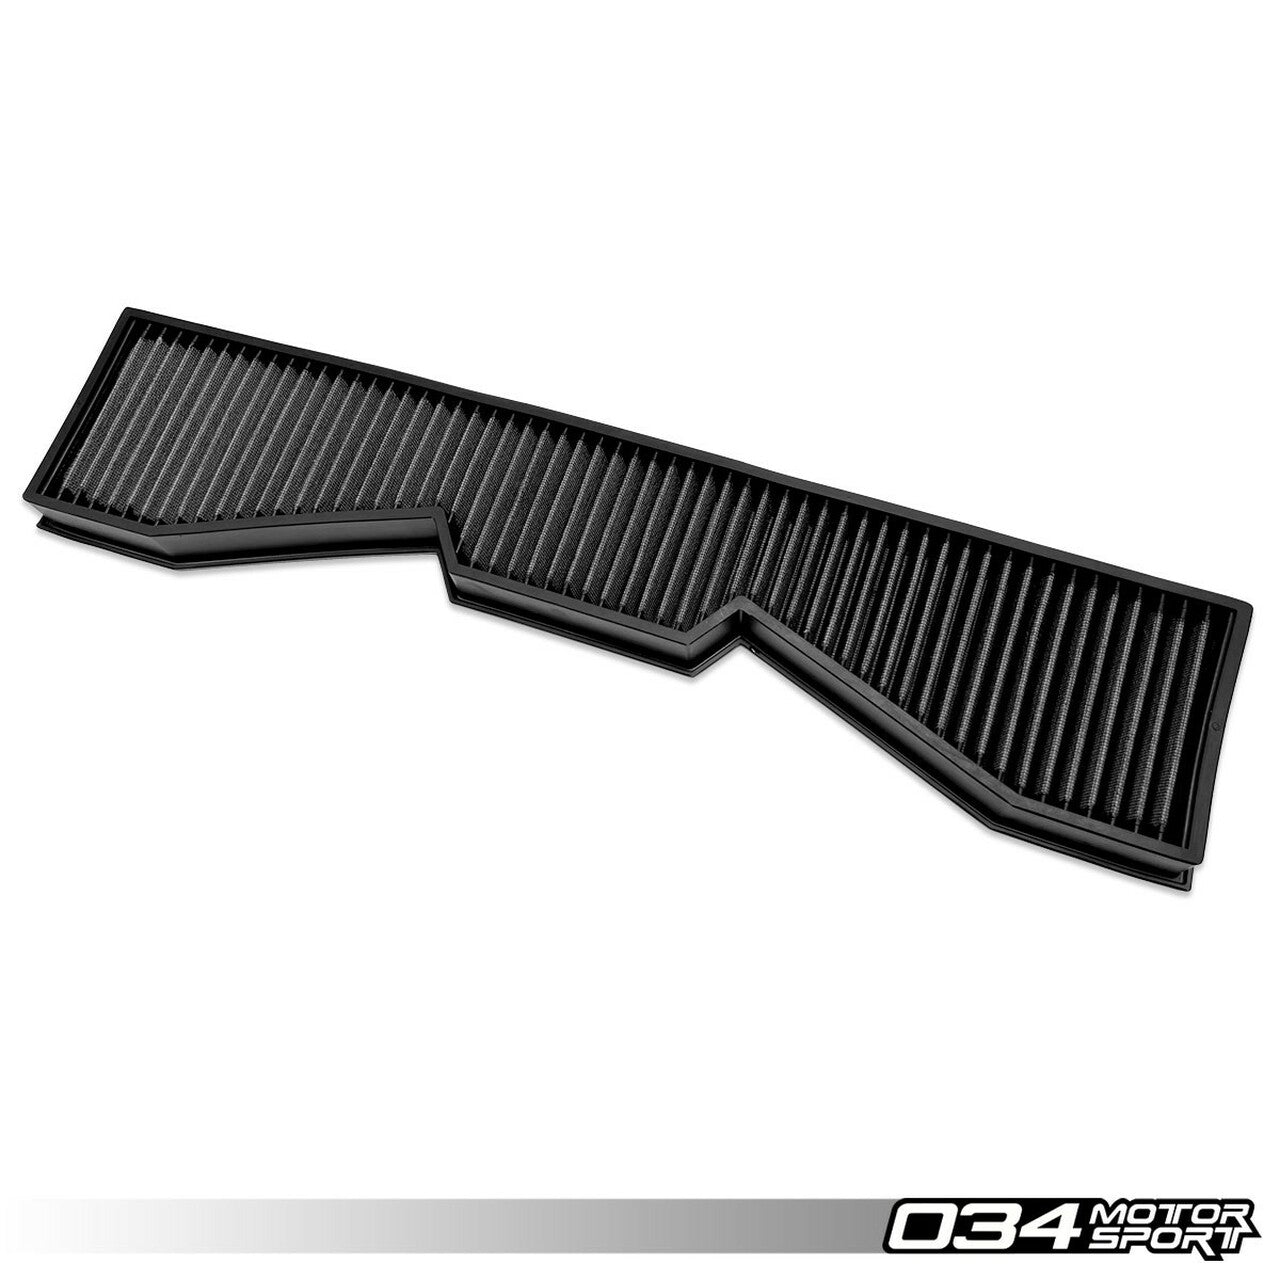 034Motorsport Performance Drop-in Air Filter, C8 RS6 & RS7 4.0T - Wayside Performance 